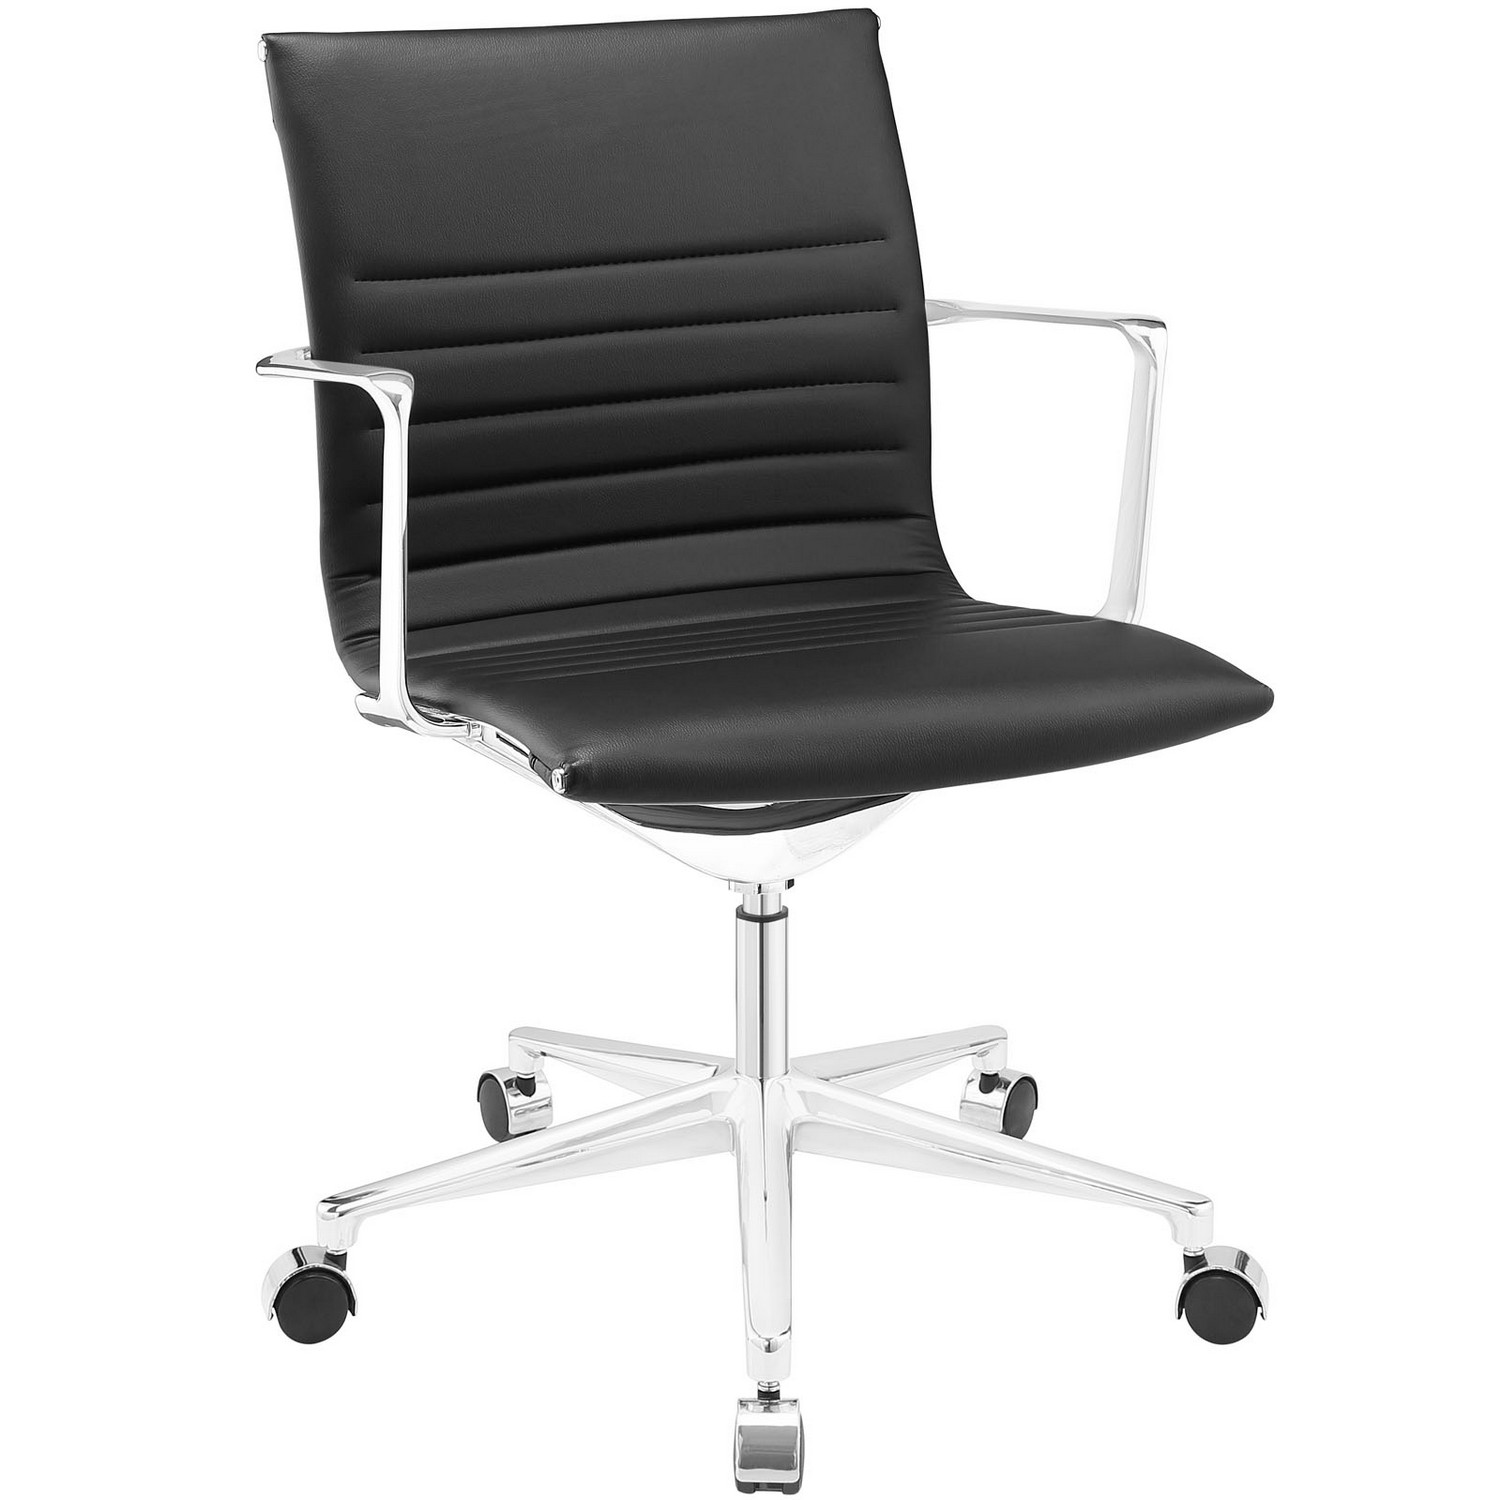 Modway Vi Mid Back Office Chair - Black